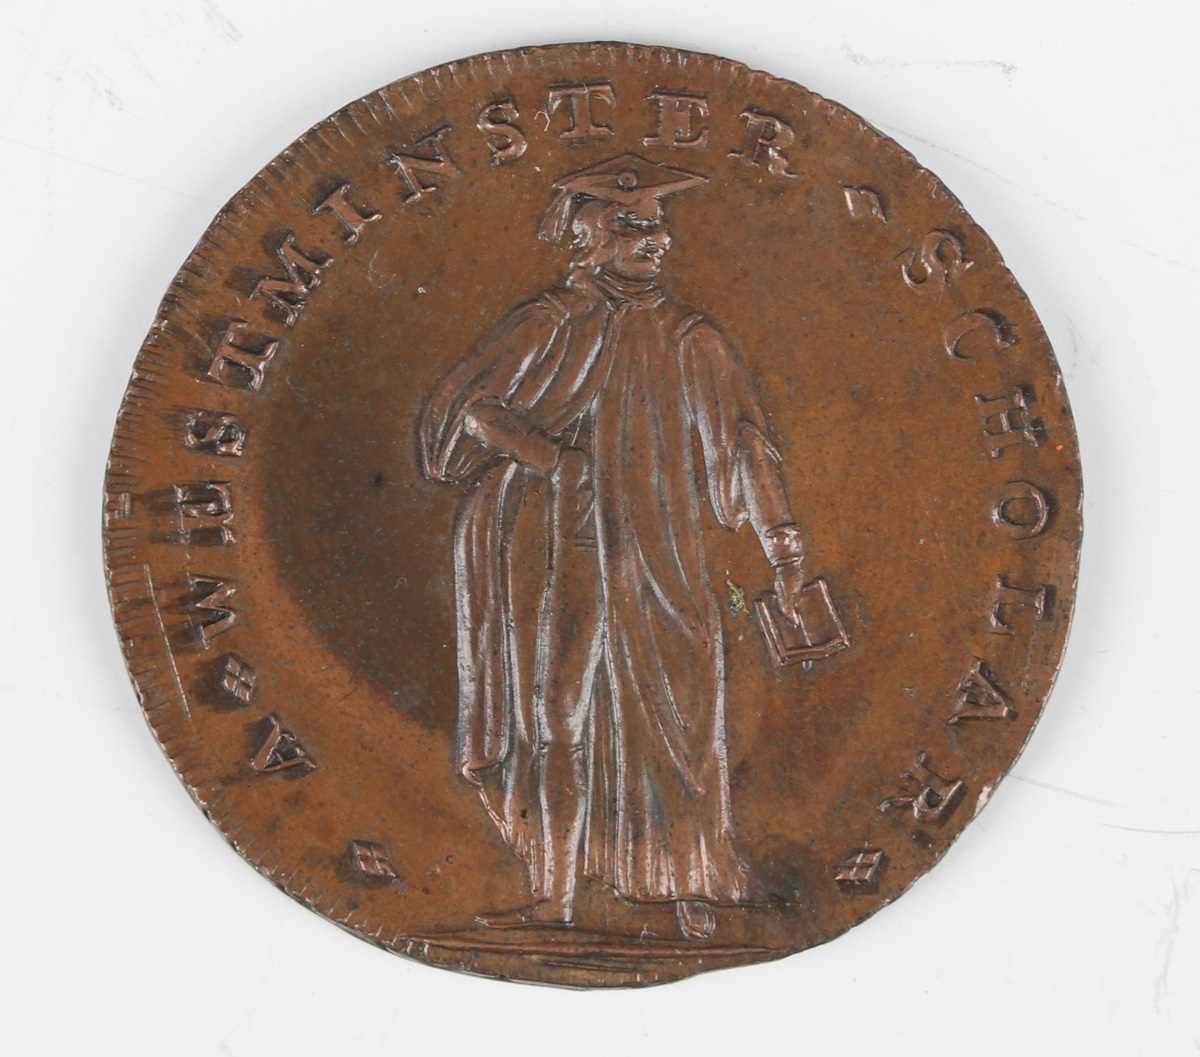 A Thomas Spence halfpenny mule token, detailed 'A Westminster Scholar' (DH 704), and an - Image 4 of 5